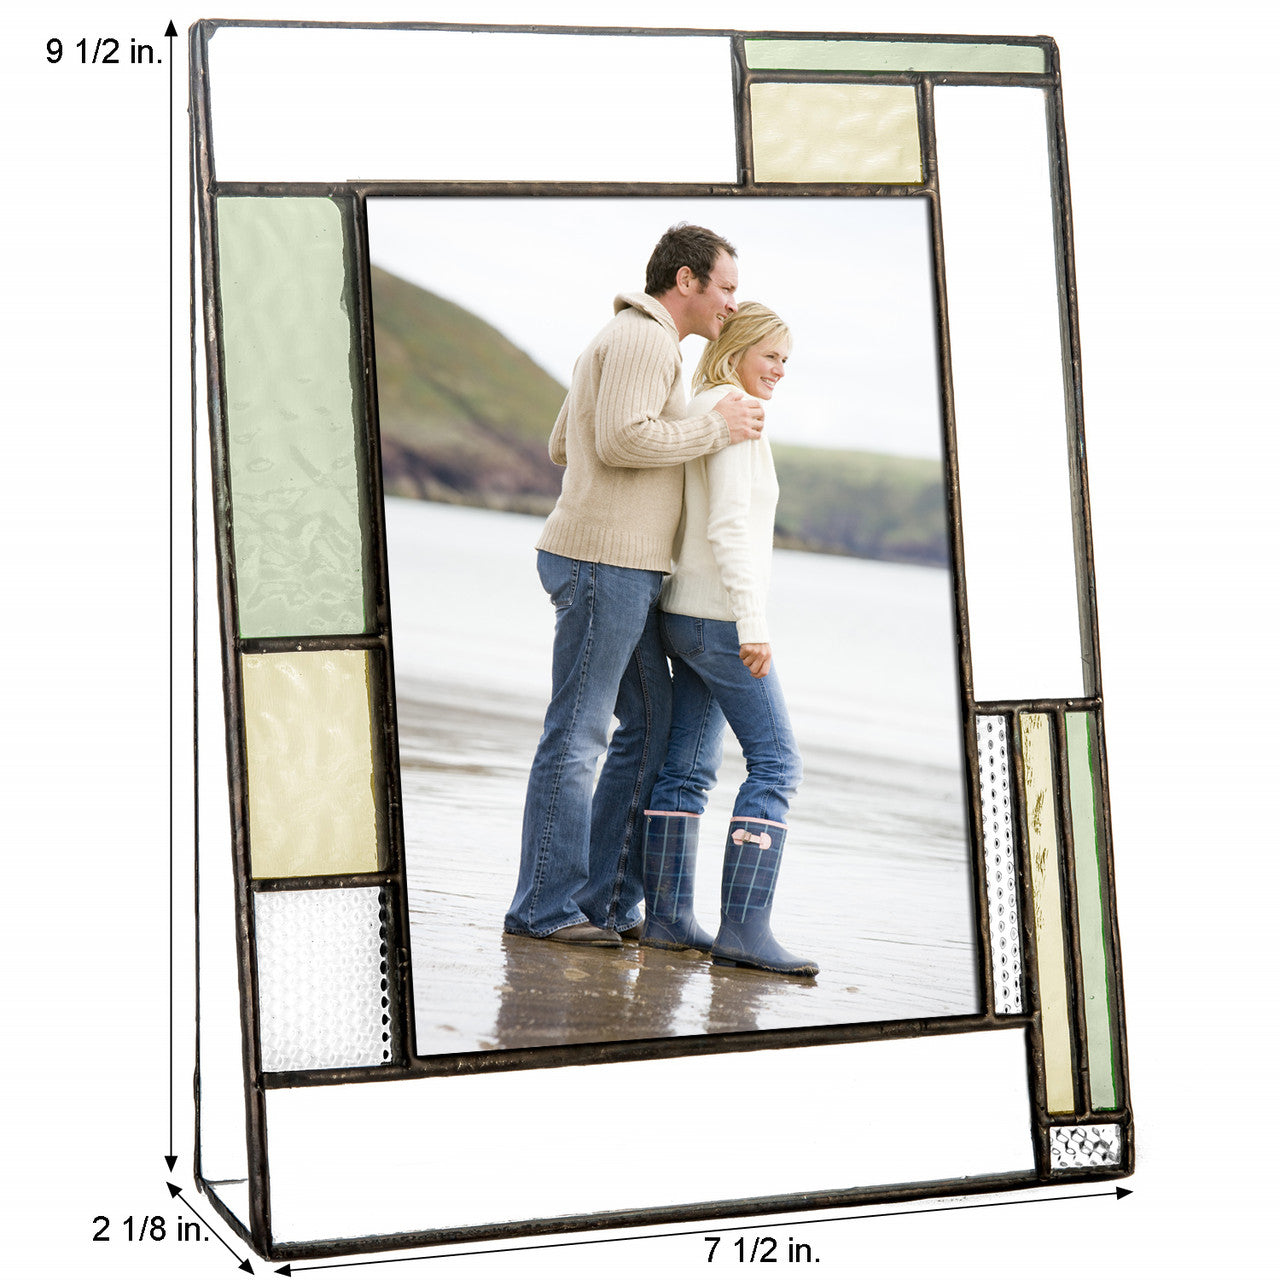 Anniversary Frame Personalized Couples Gifts J Devlin | Pic 430 EP625